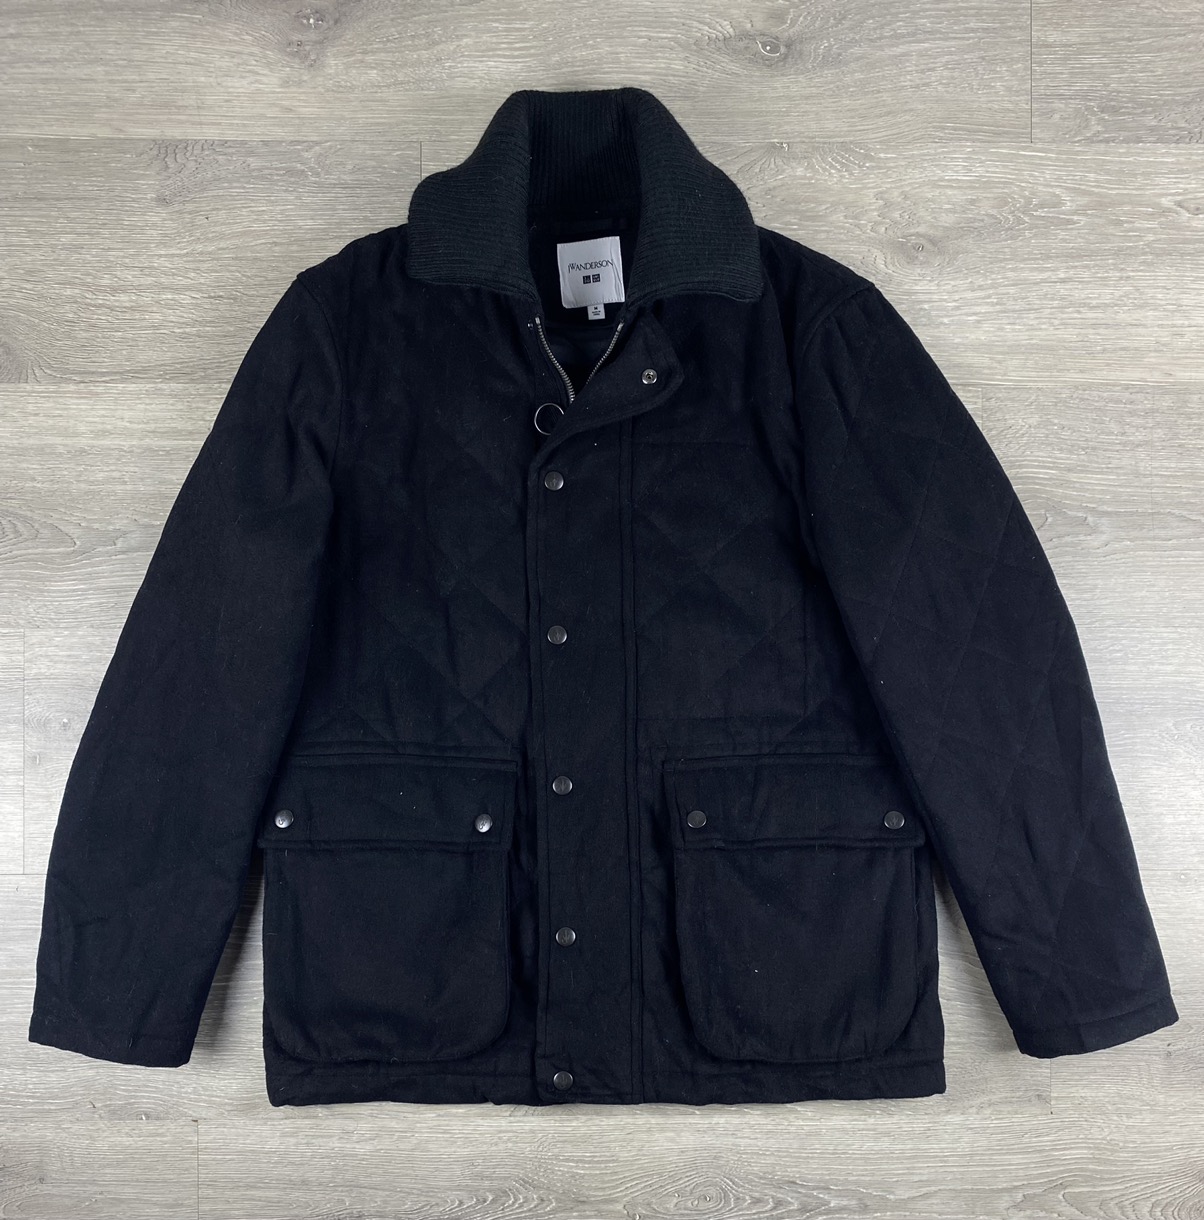 Uniqlo - J. W. Anderson X Uniqlo Quilted Double Pocket Wool Jacket - 1